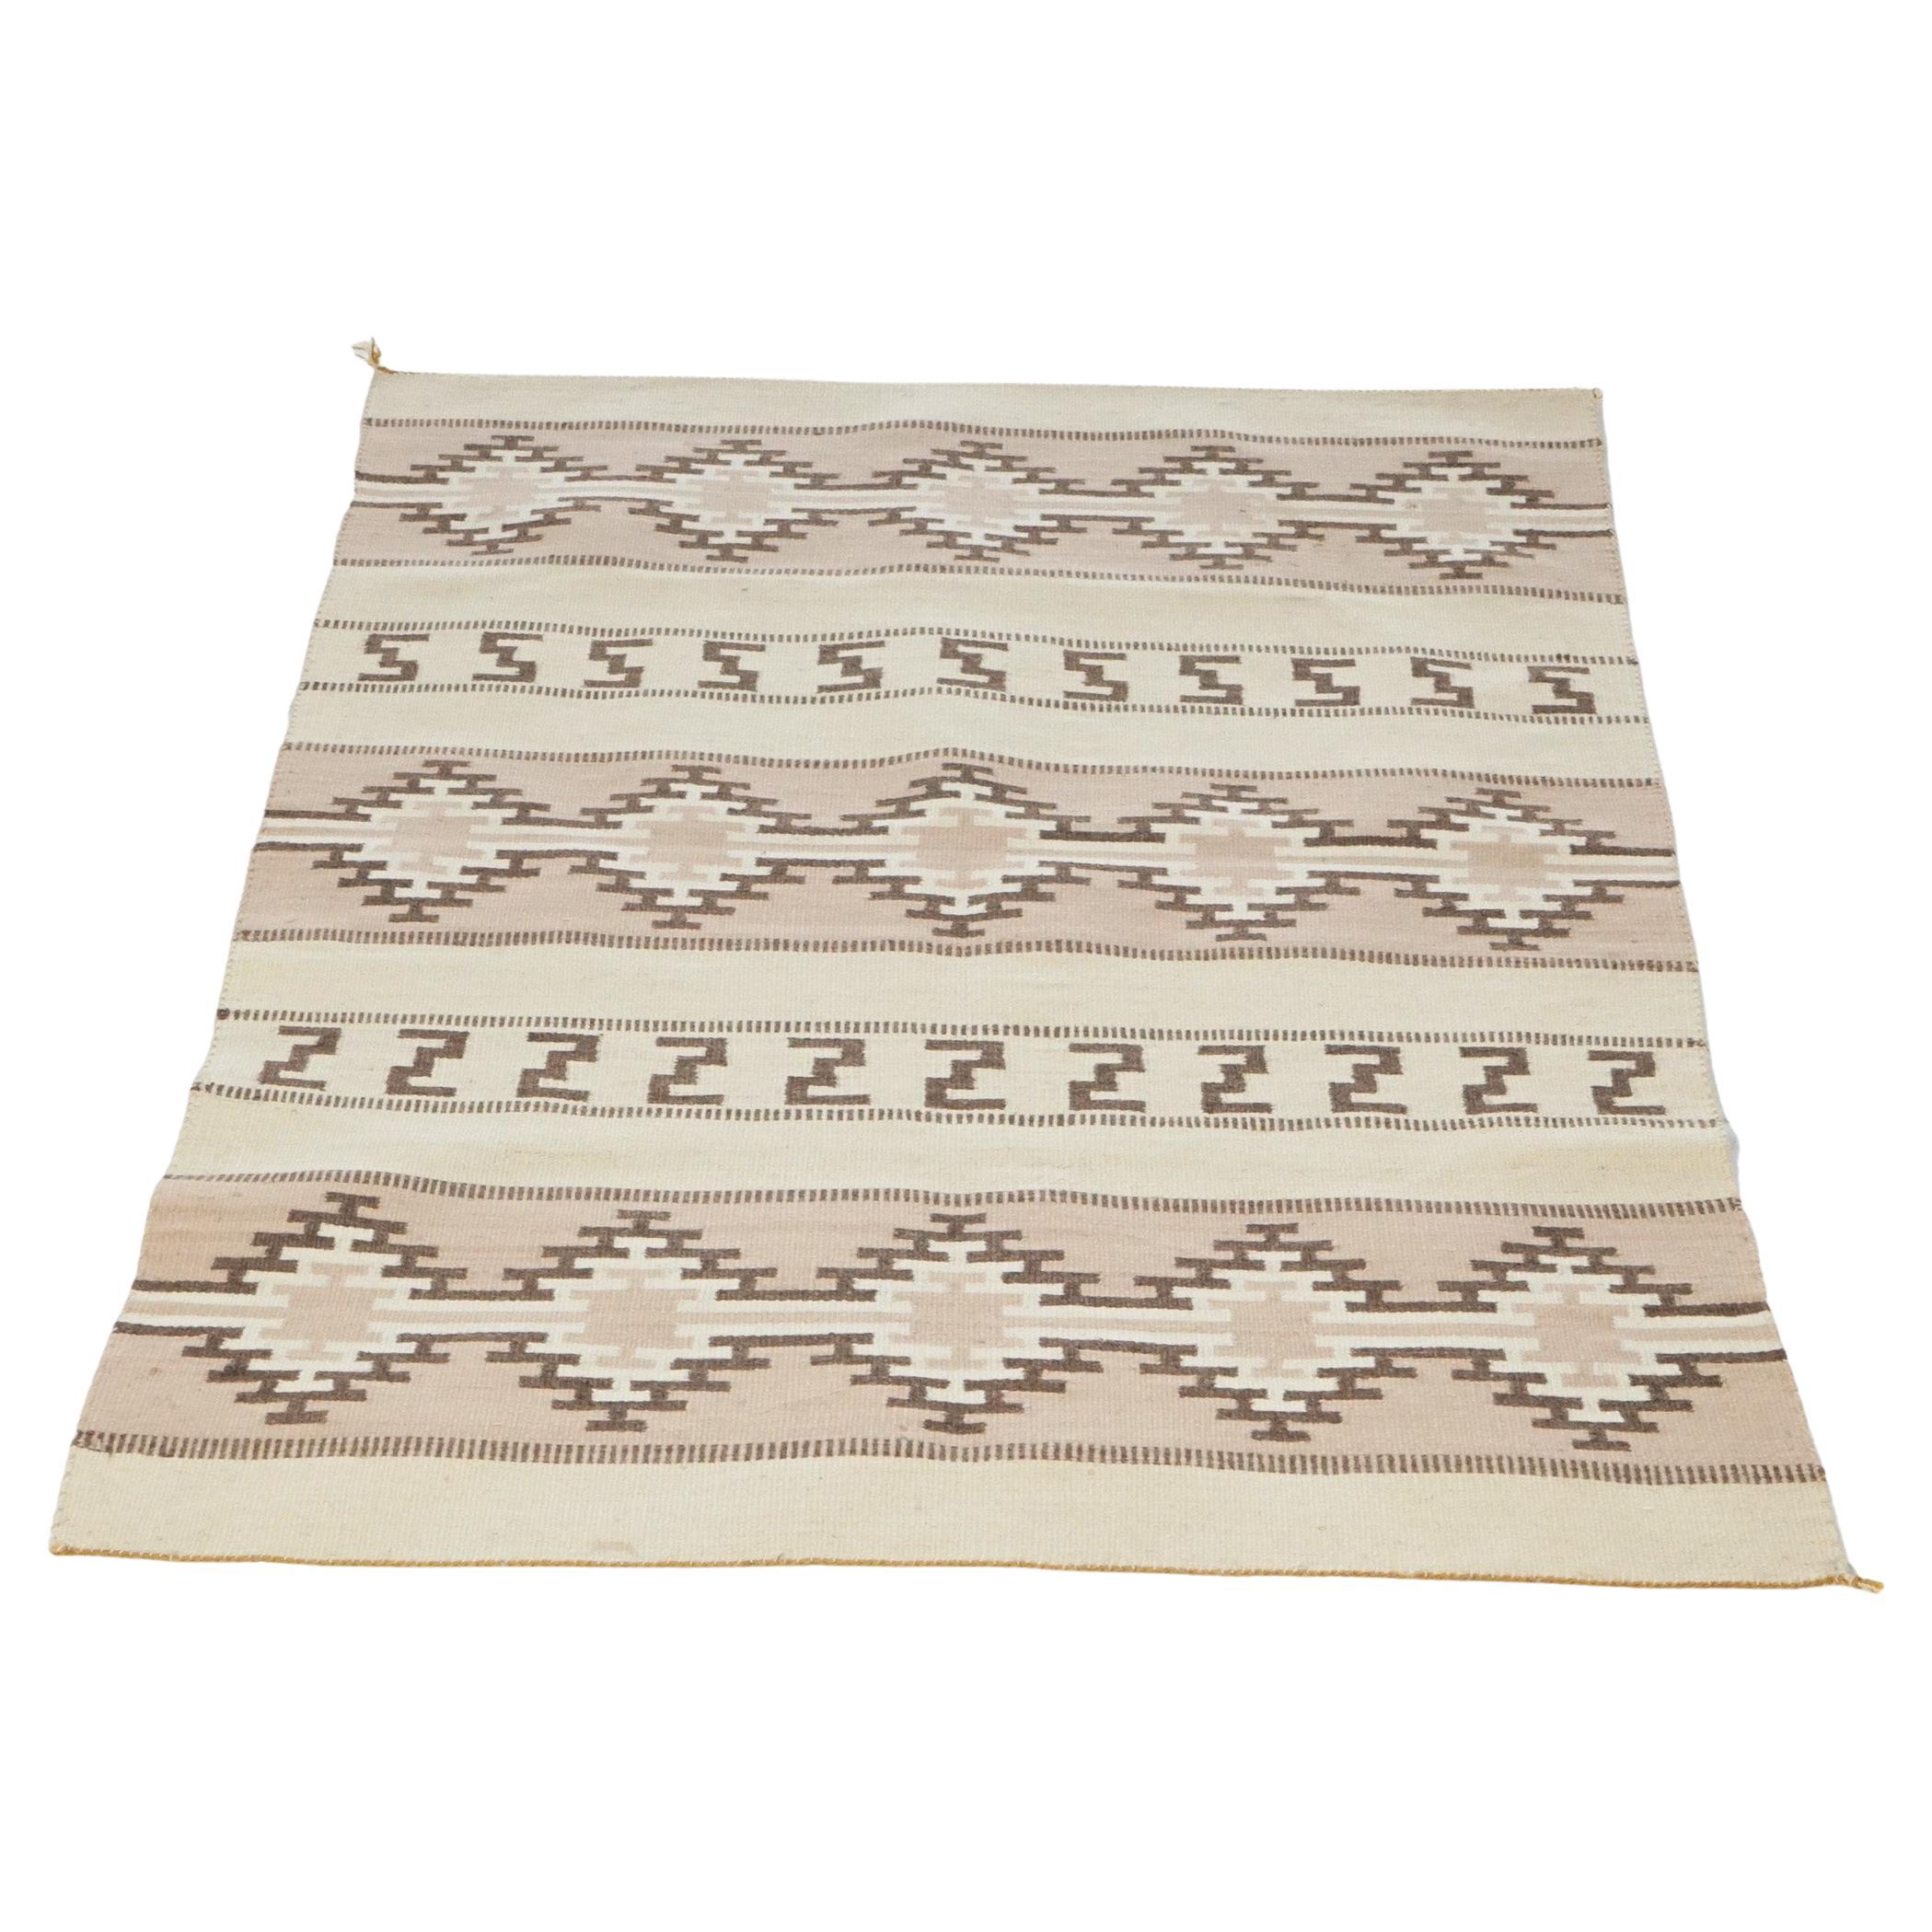 Southwestern American Indian Navajo Style Rug, 20th Century For Sale